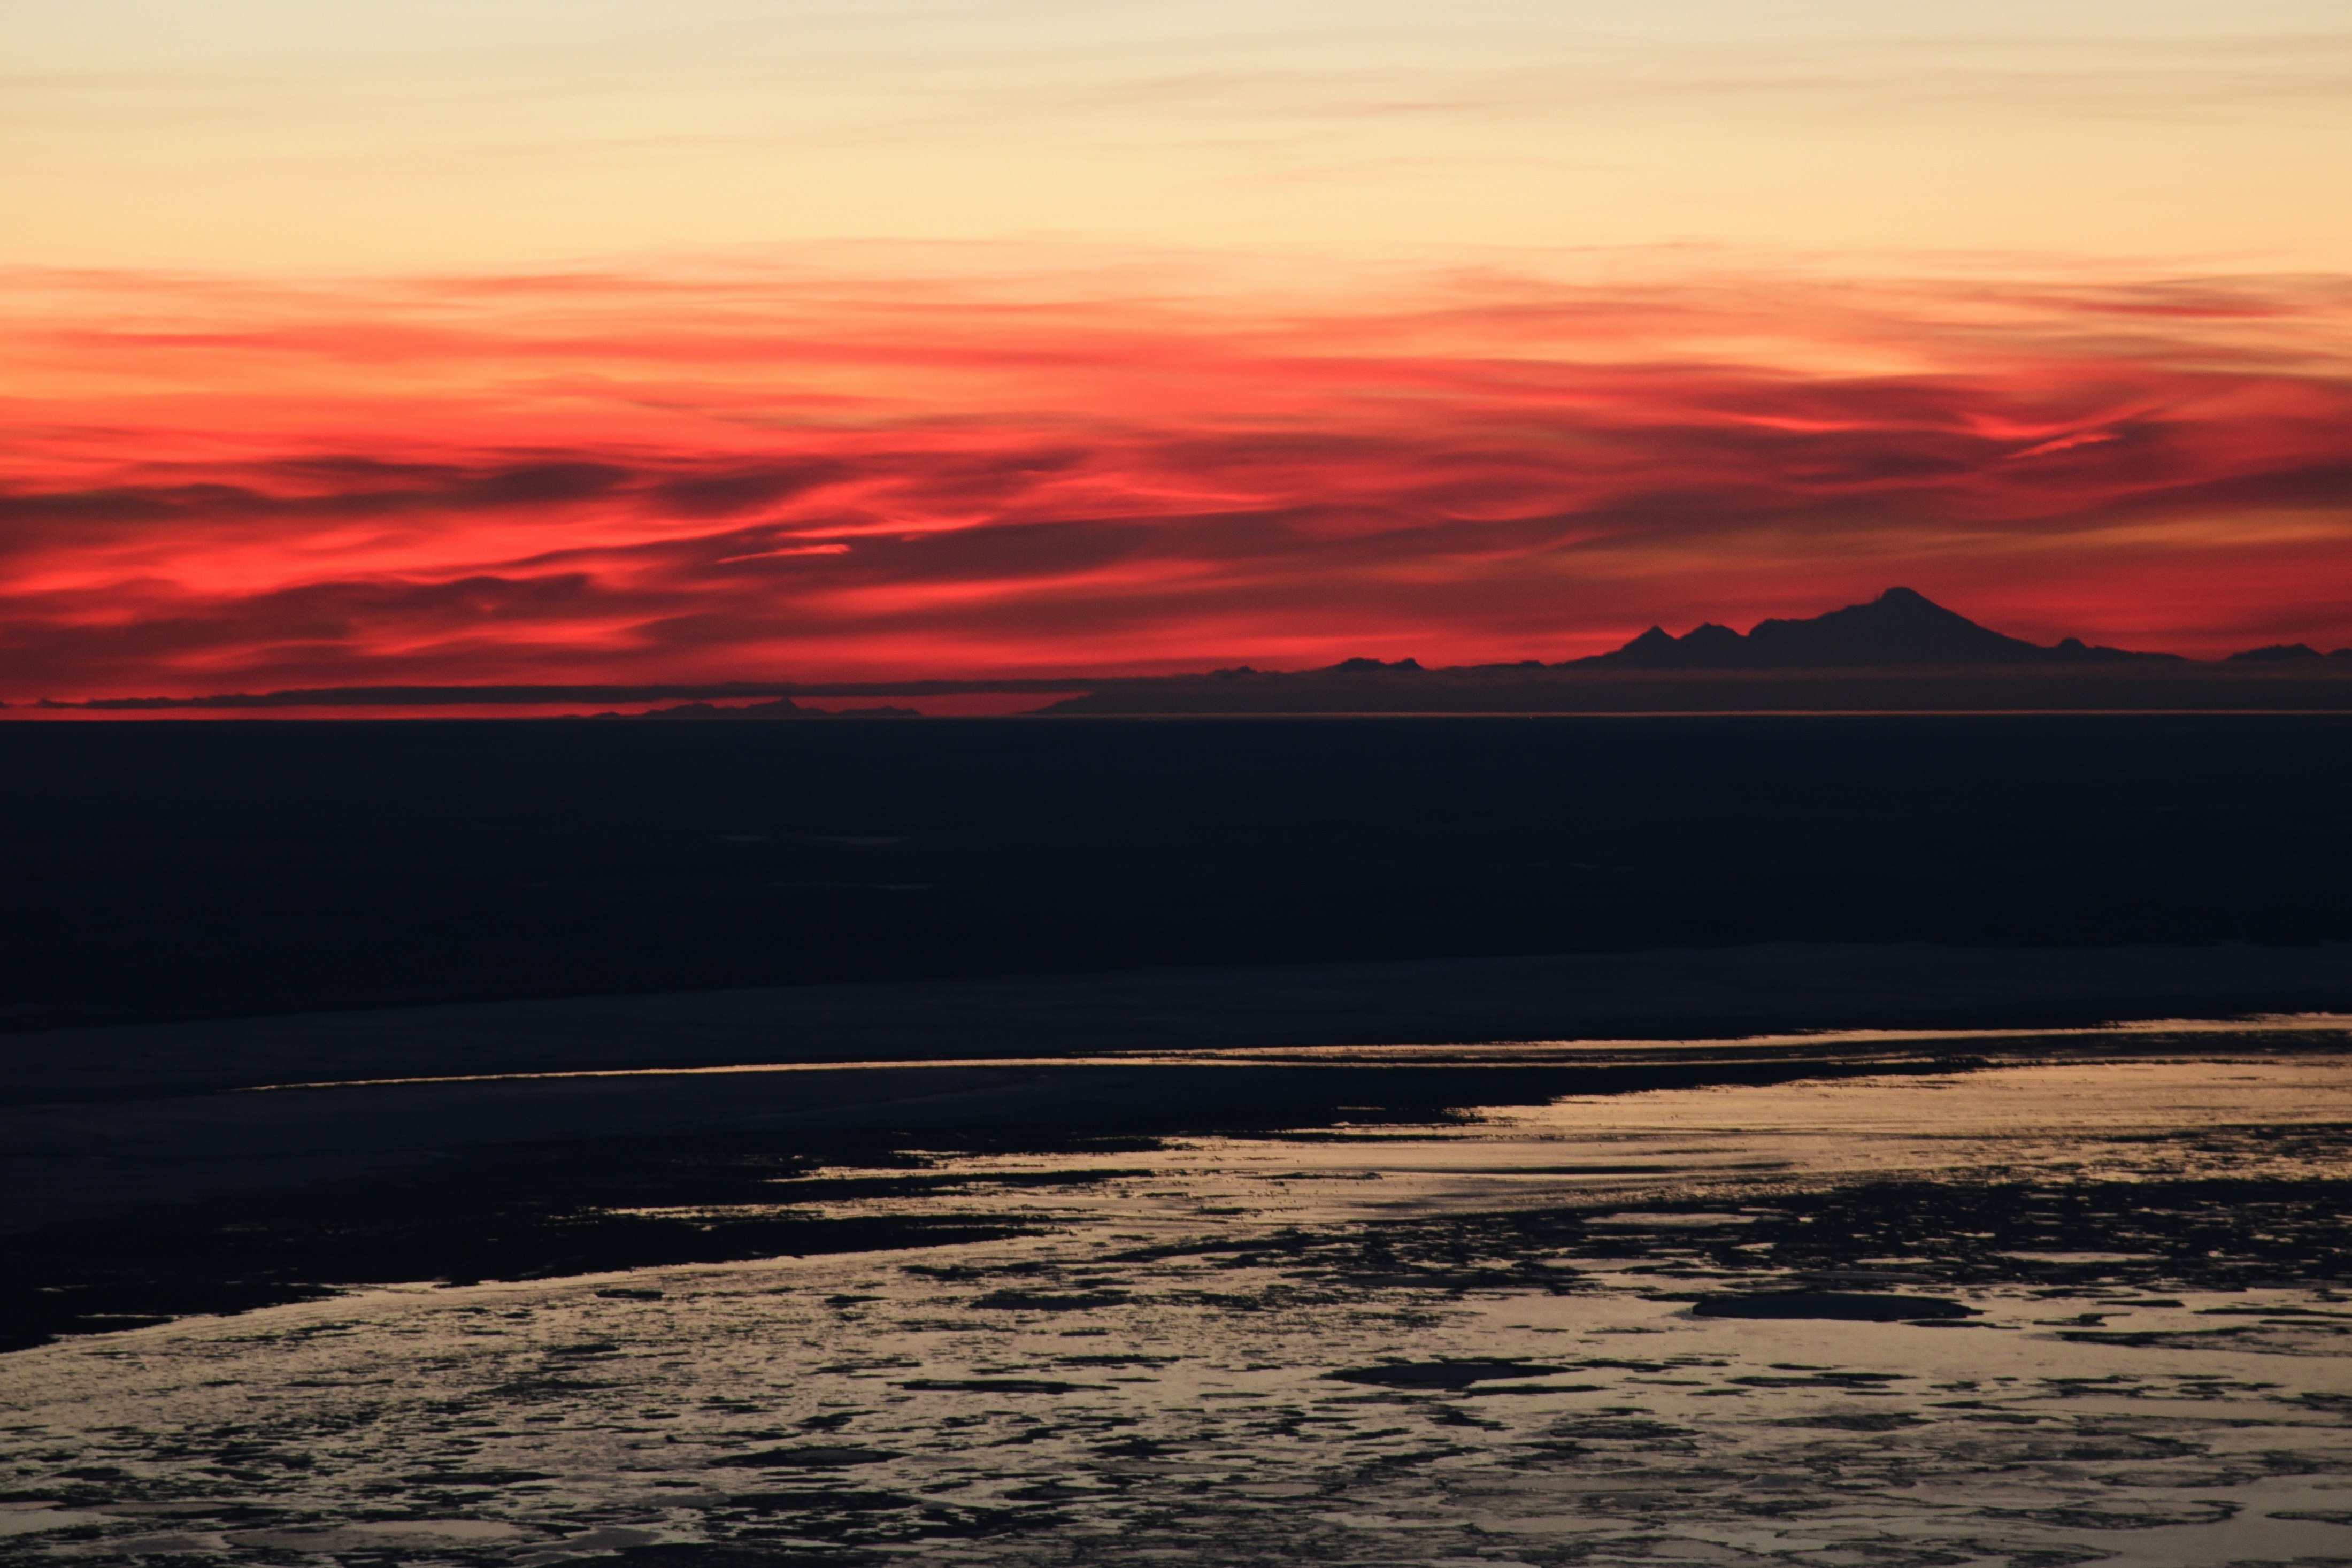 On our way to a winter campsite on the west summit of McHugh Peak, we were treated to this incredible swirling pink sunset behind Mt. Redoubt.